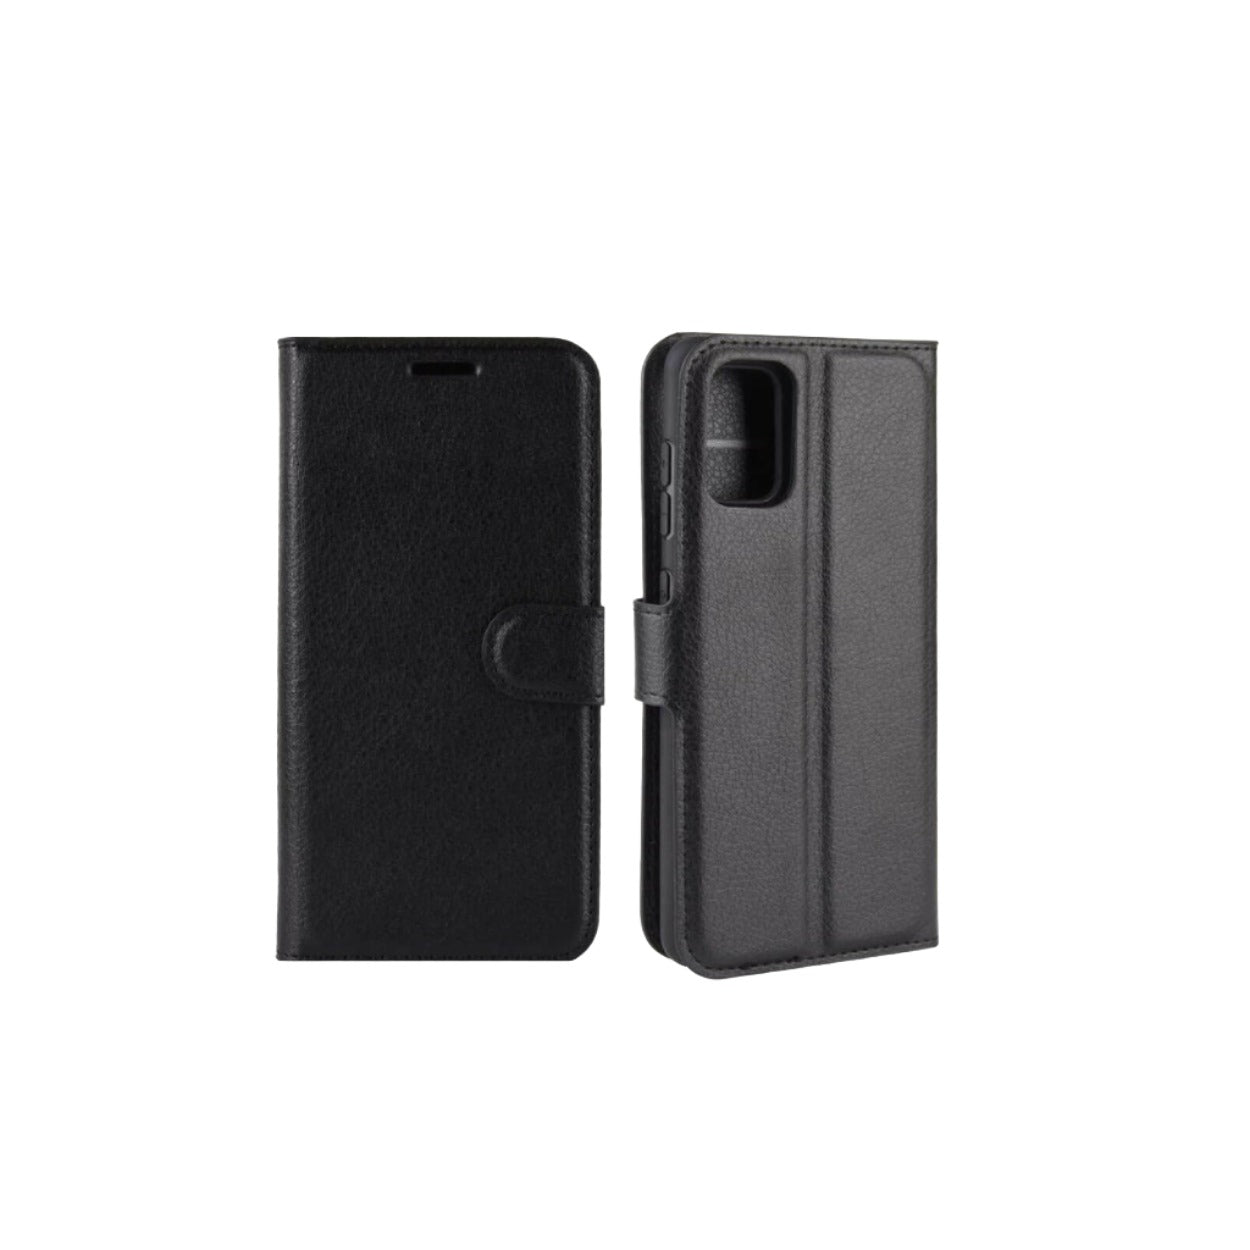 PU Leather Wallet Cover For Samsung Galaxy A51 Case Holder Card Slots Black